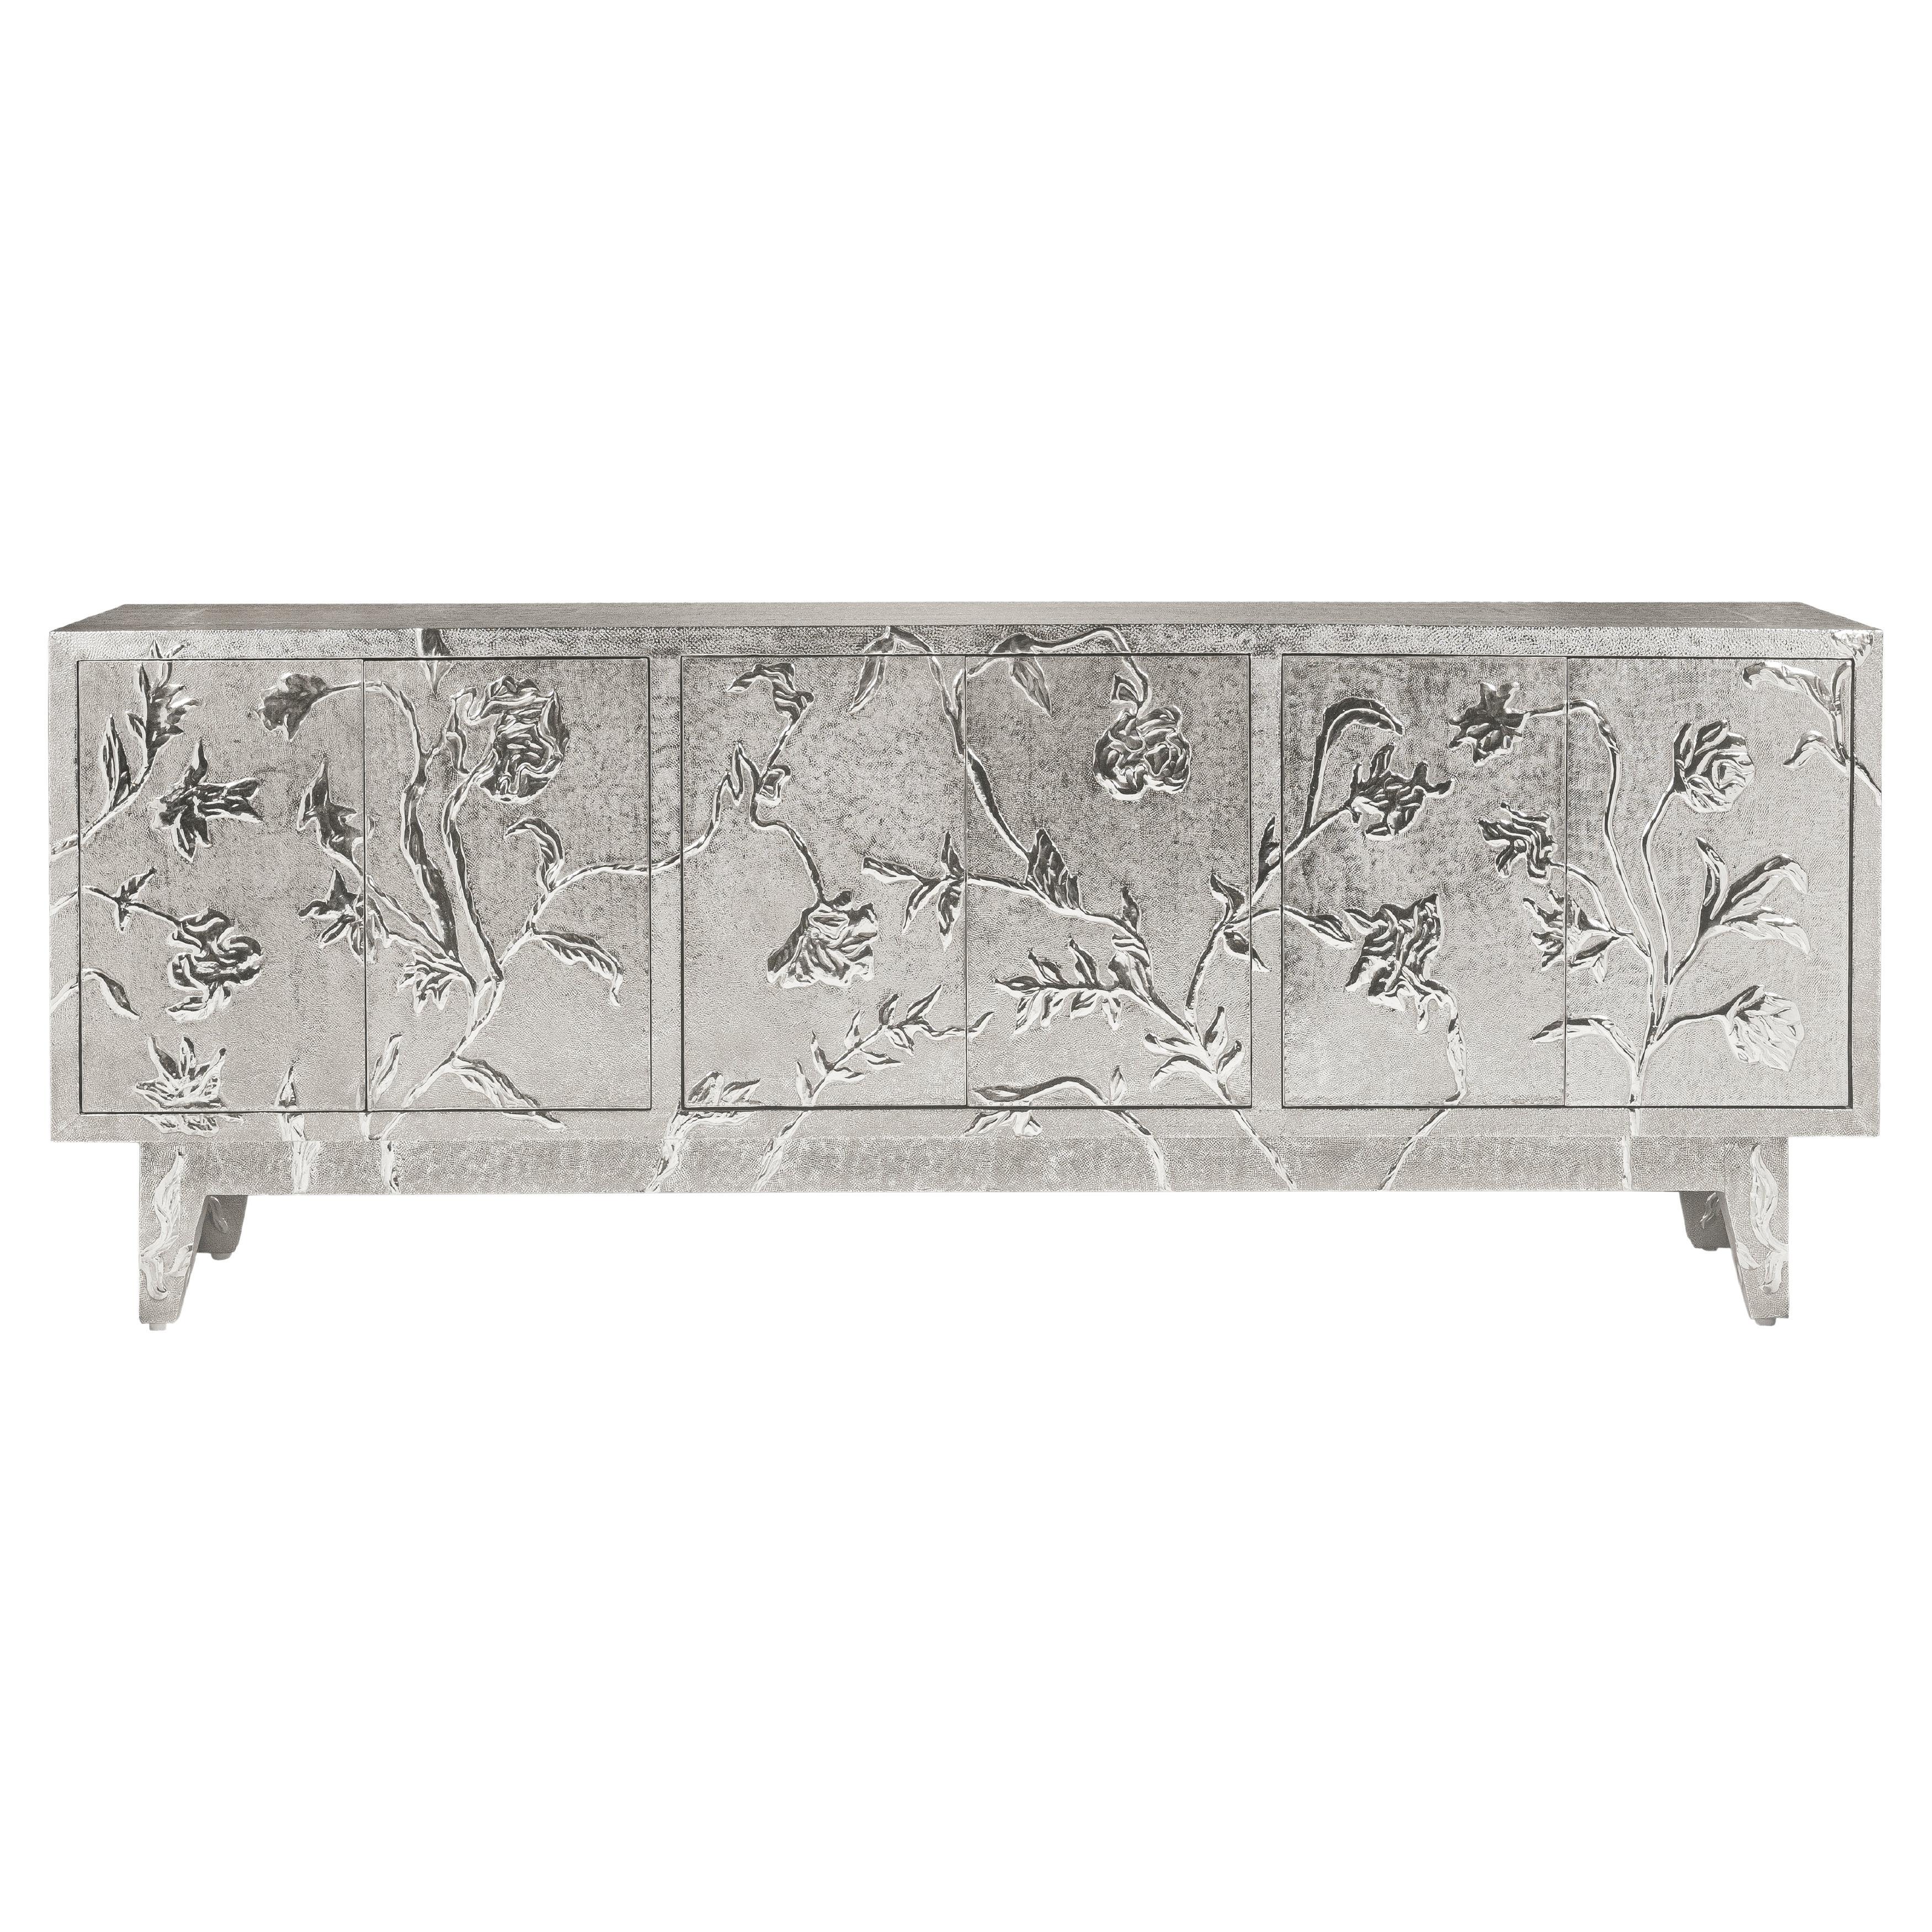 Introducing the Floral Art Deco Sideboard - Inspired by the Floral Motifs of Rajasthan Palaces

Stephanie Odegard presents the Floral Art Deco Sideboard, a masterpiece art deco sideboard that seamlessly blends artistry and functionality. This